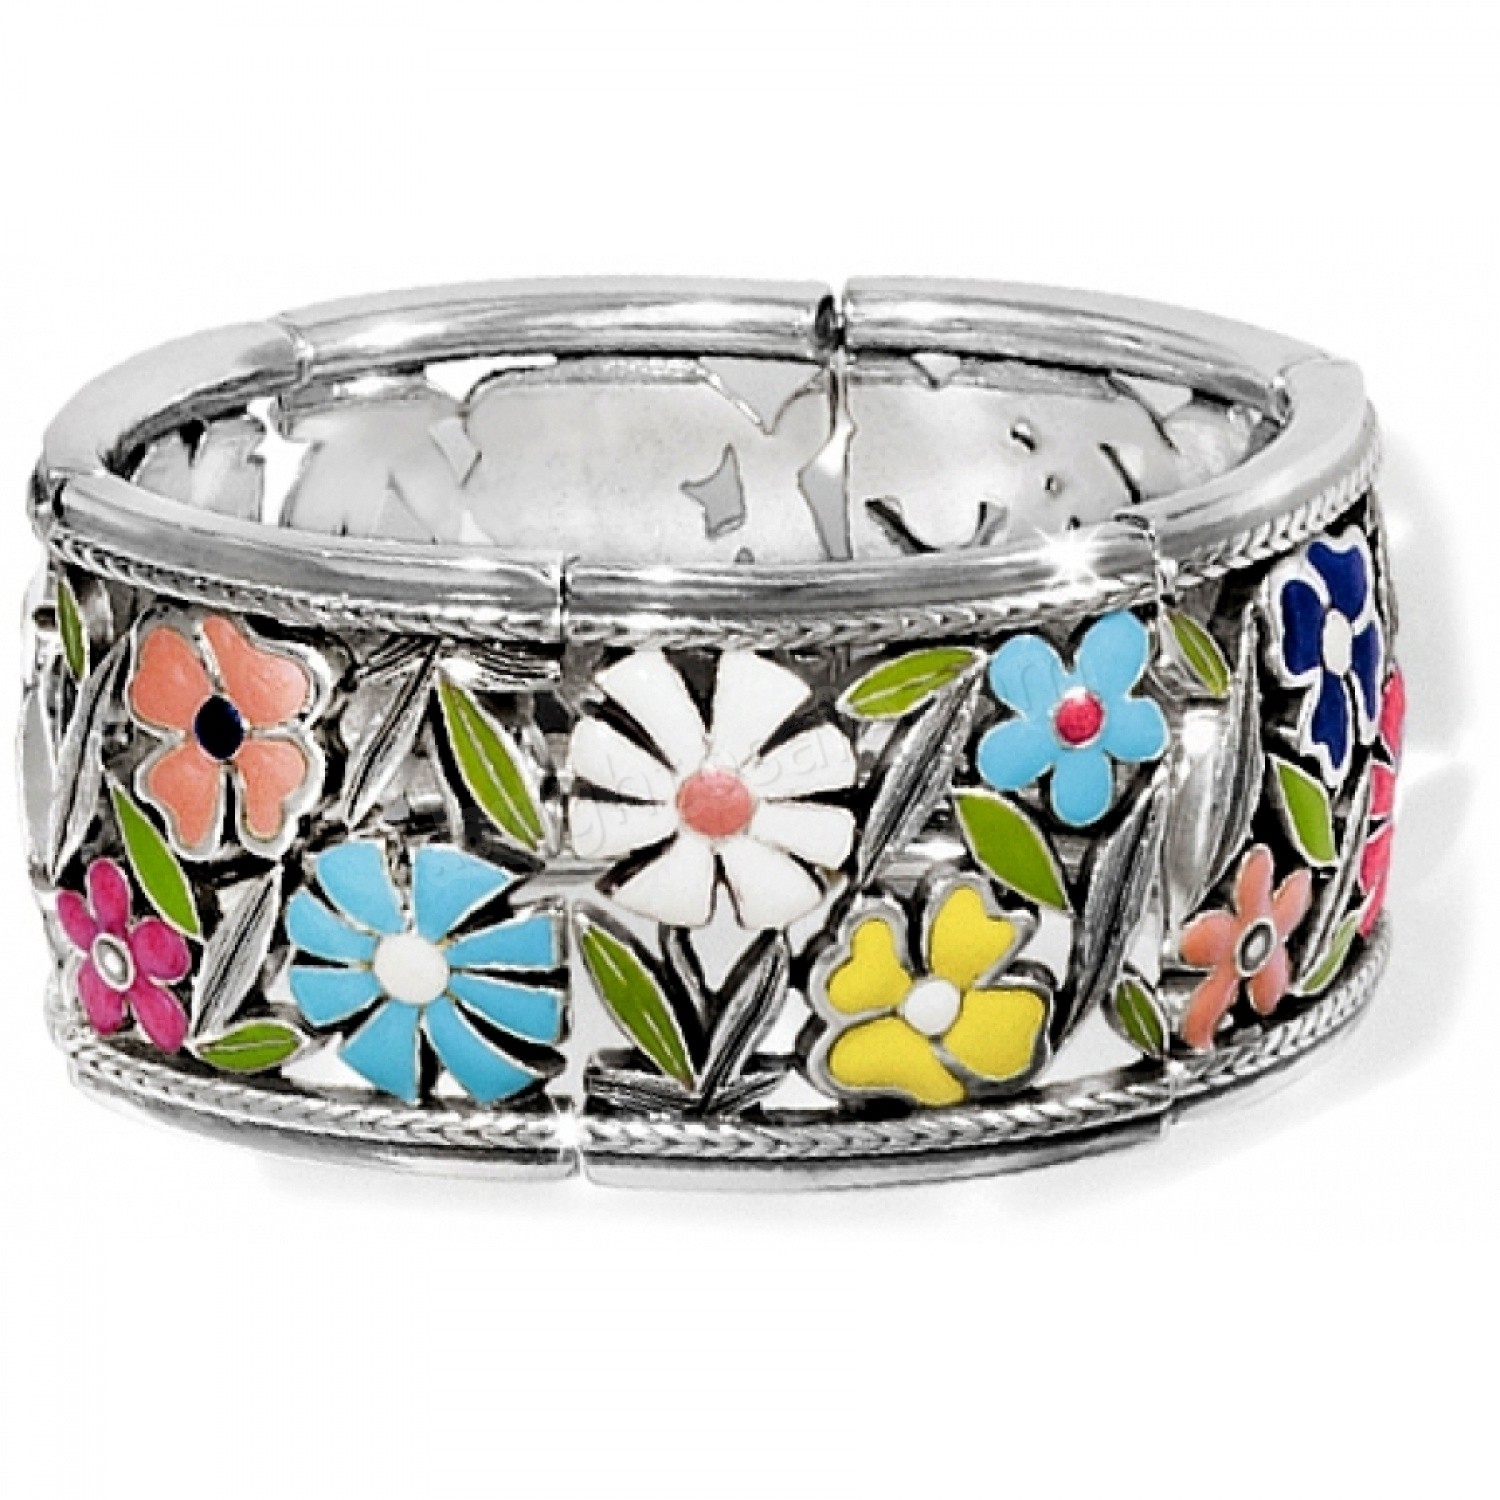 Brighton Collectibles & Online Discount Painted Garden Stretch Bracelet - Brighton Collectibles & Online Discount Painted Garden Stretch Bracelet